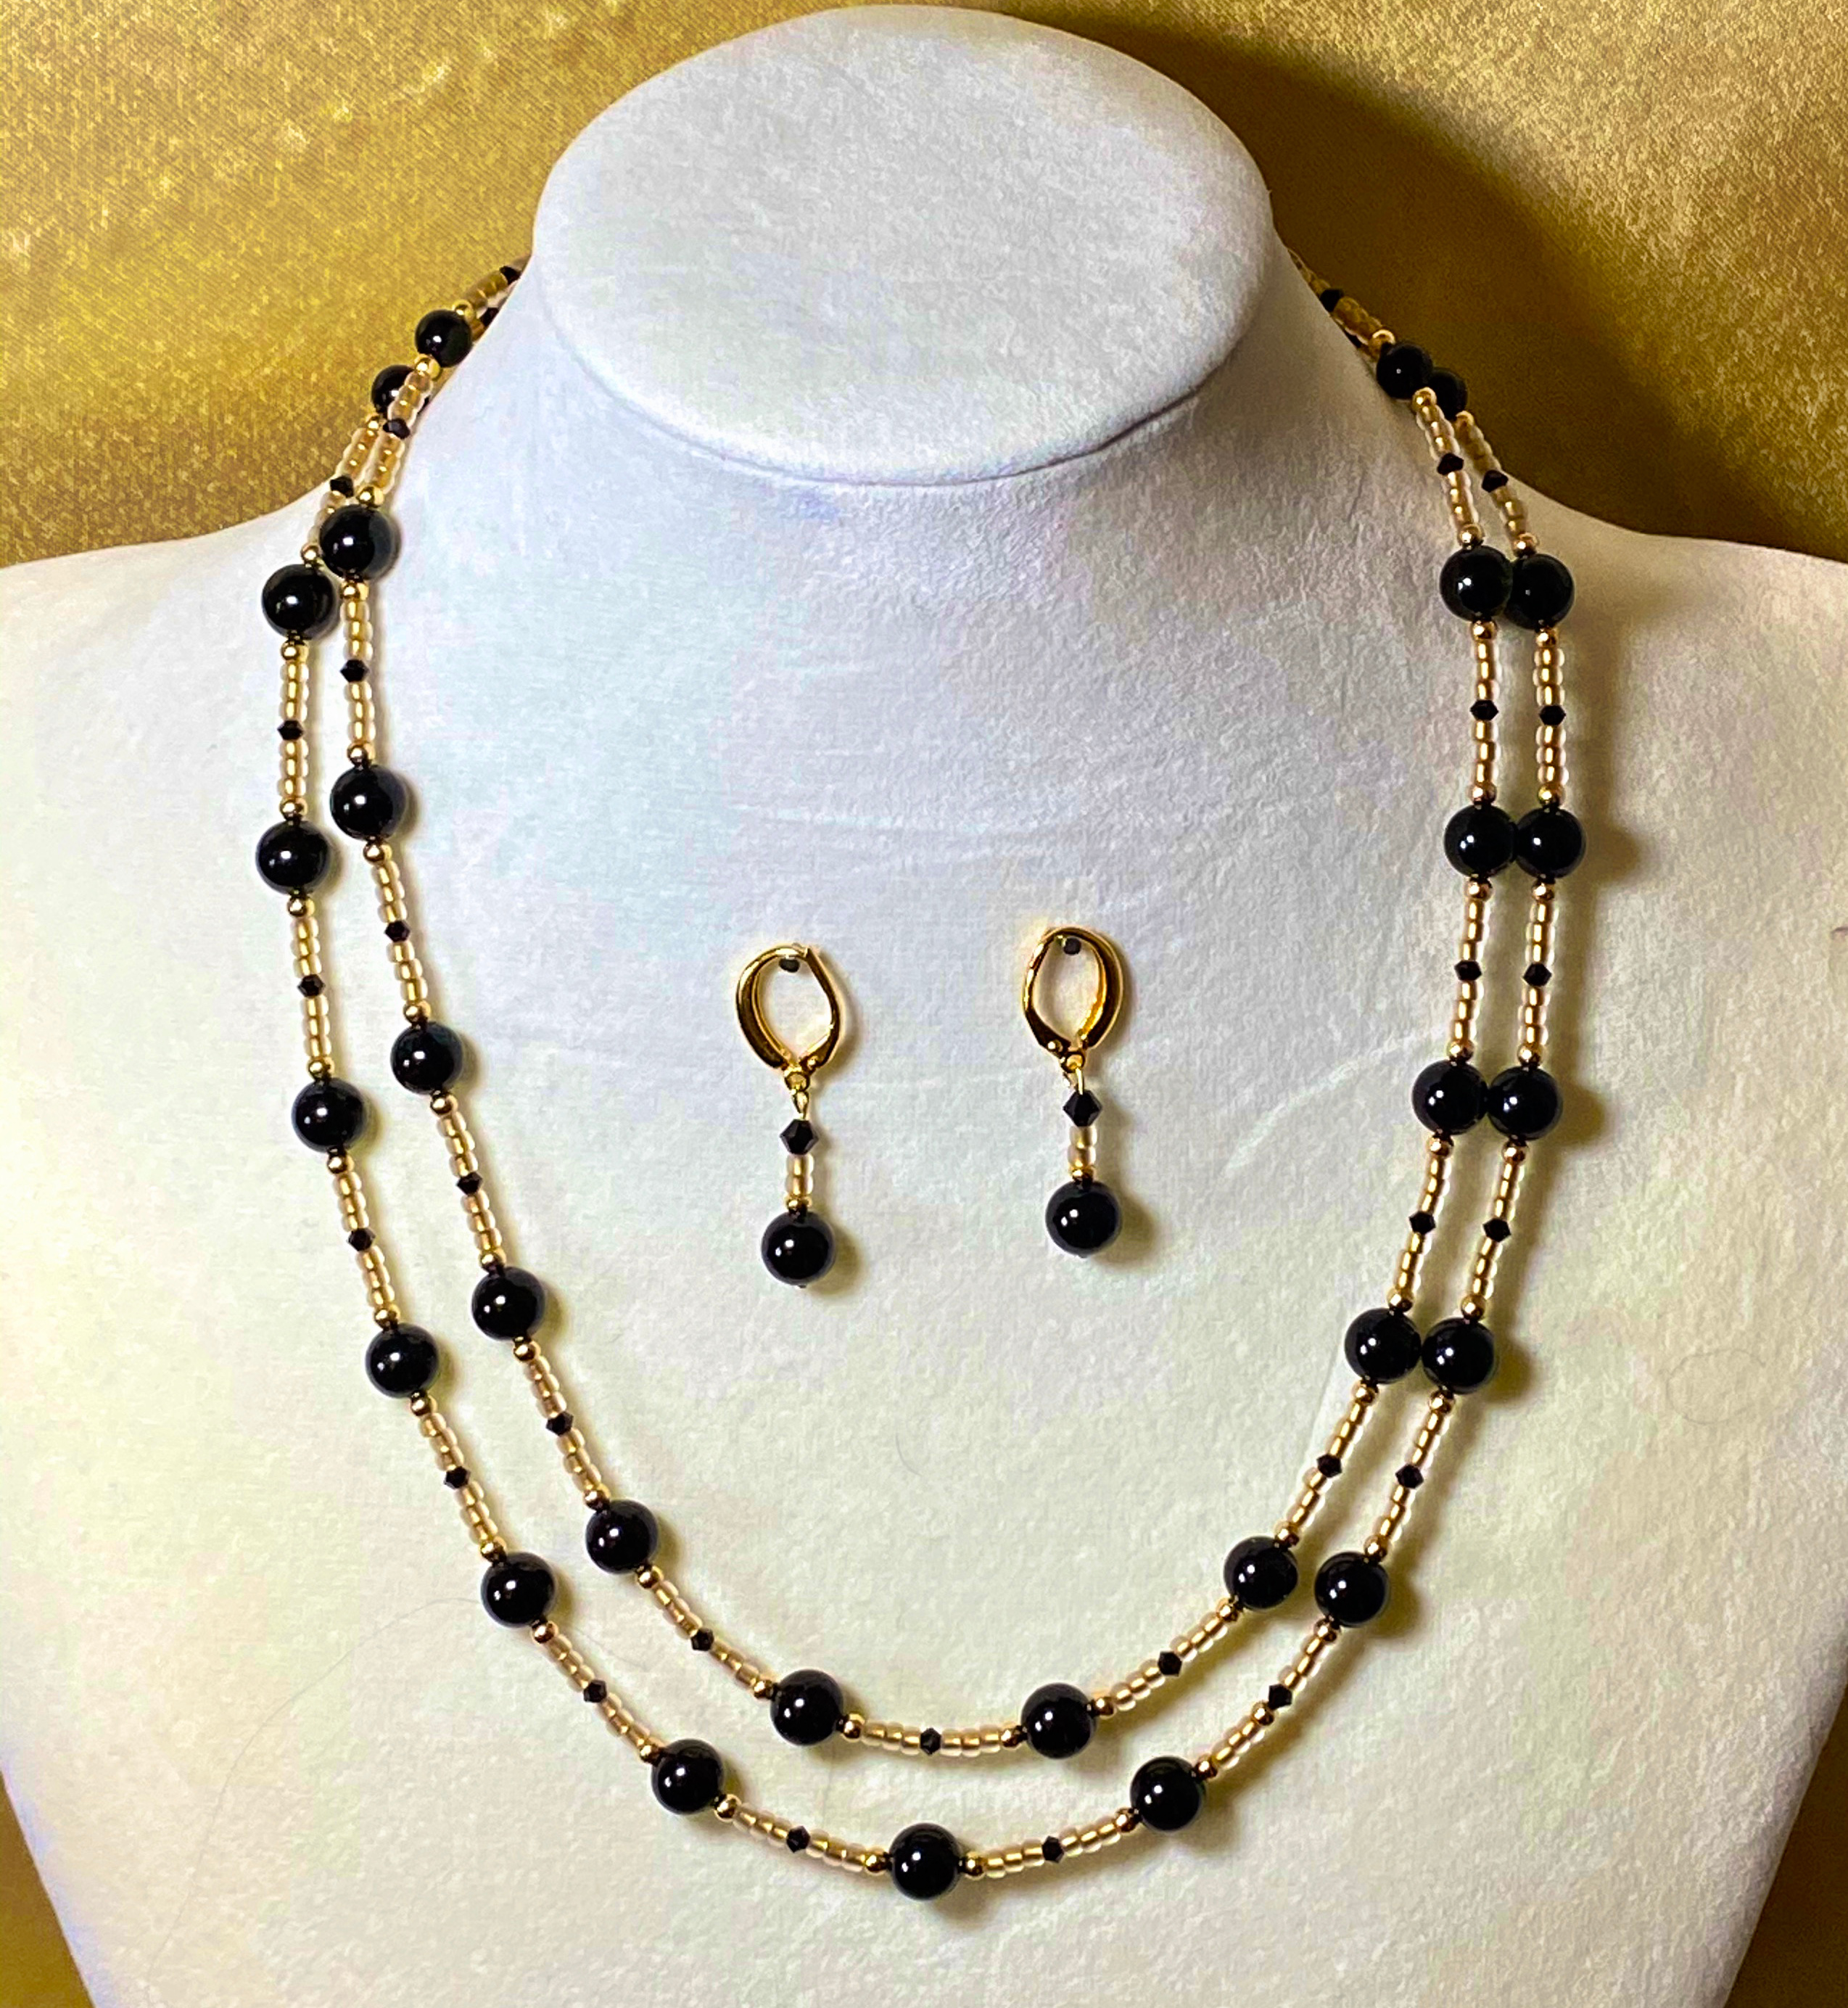 Picture of Black and Gold Crystal Necklace and Earrings